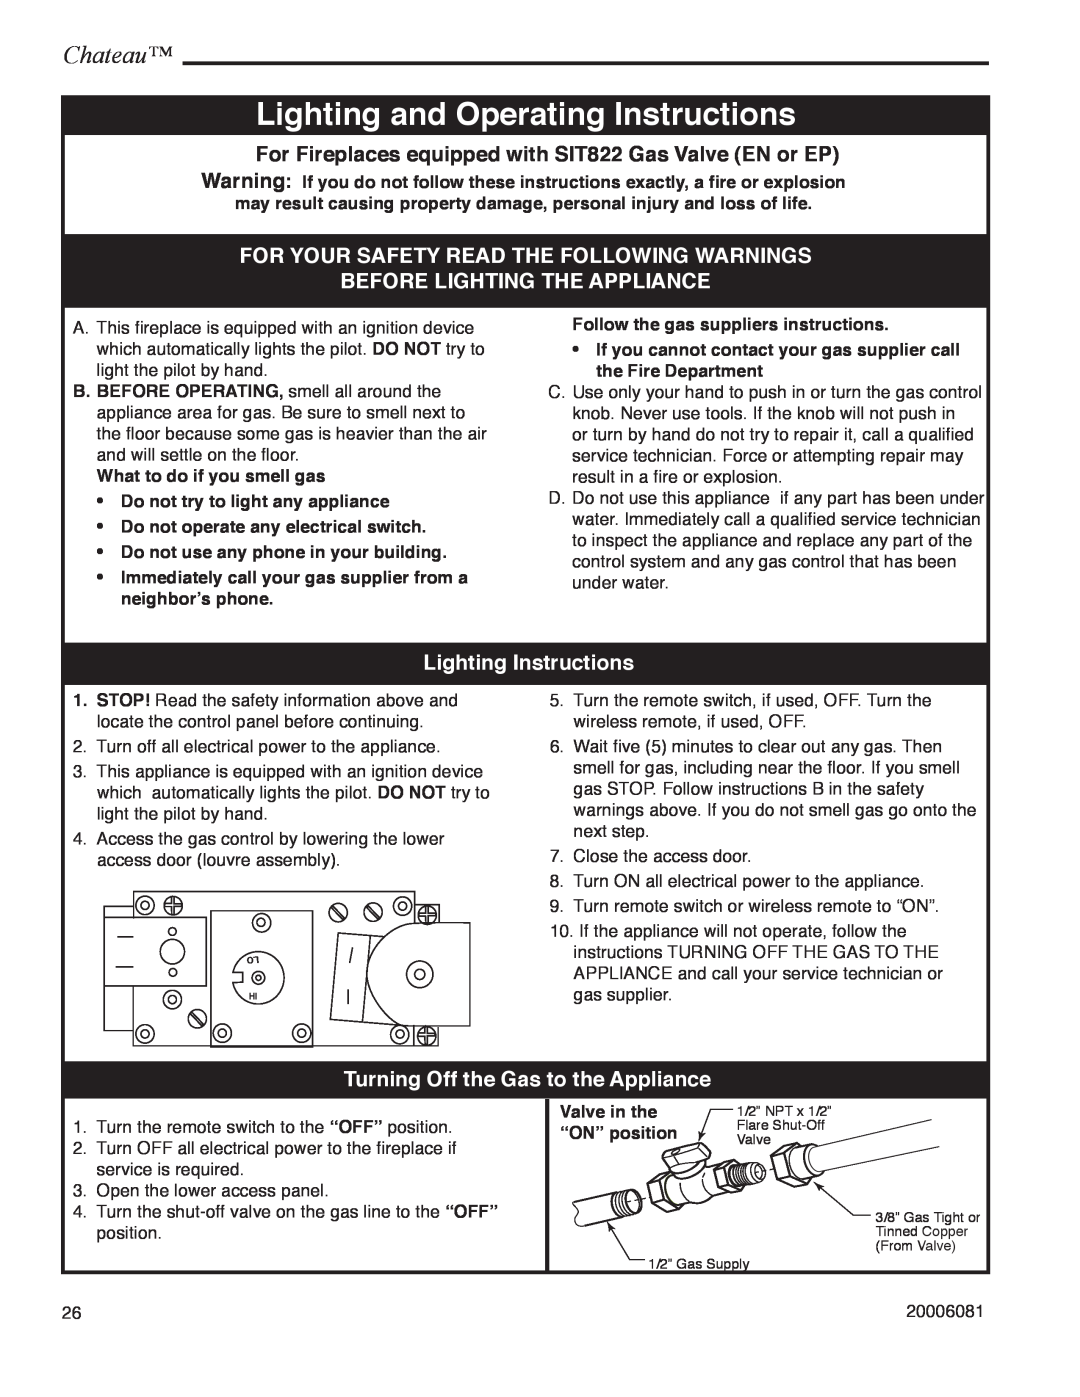 Vermont Casting DVT38 Lighting and Operating Instructions, For Your Safety Read The Following Warnings, Chateau 